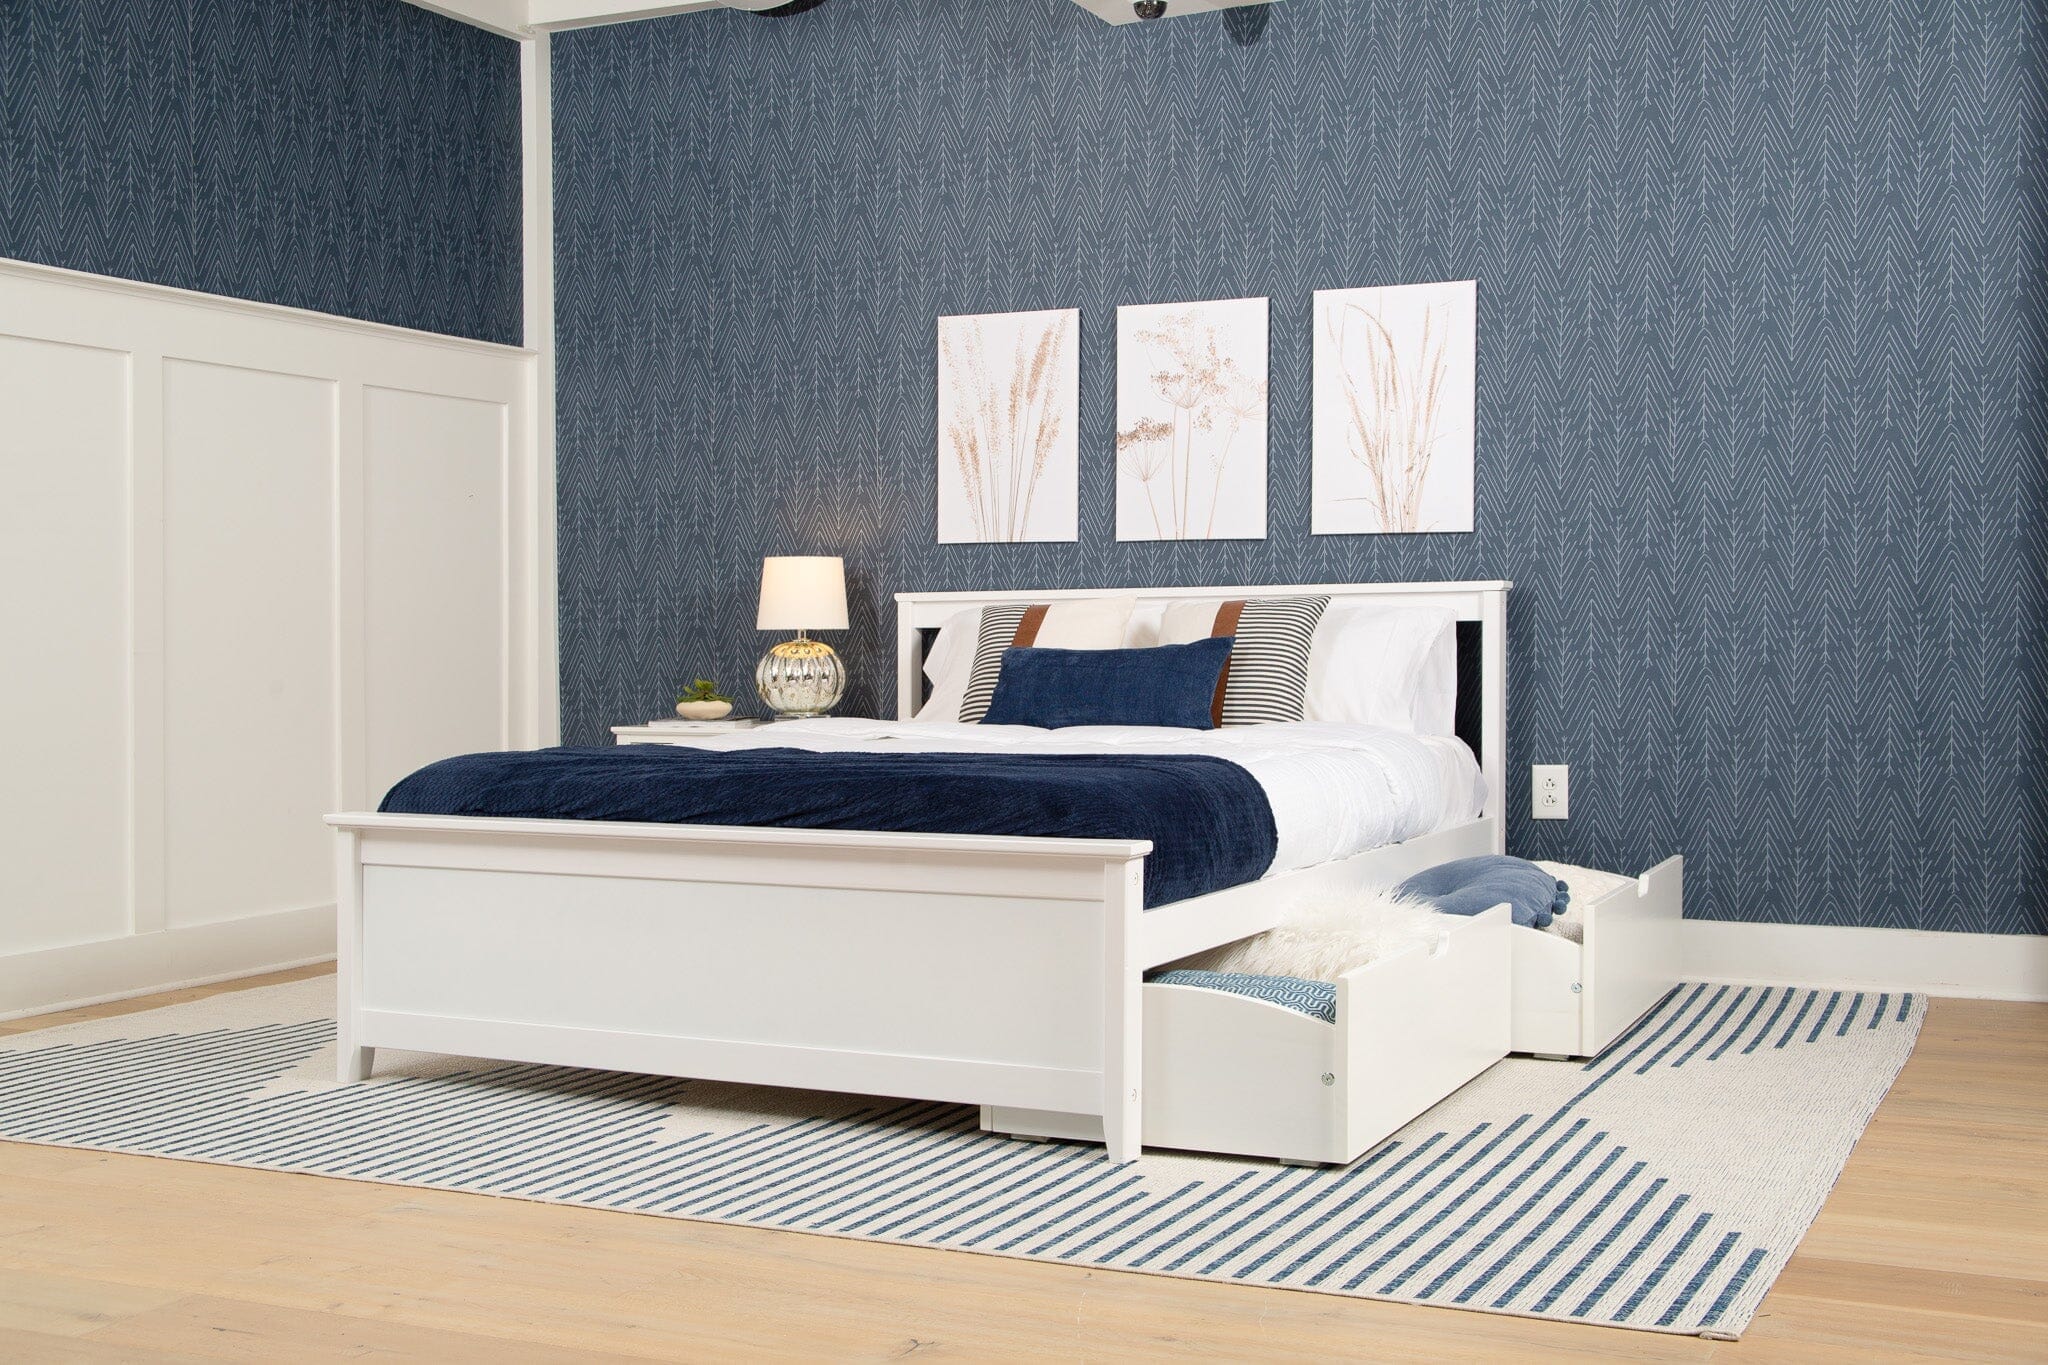 4 Best Ways to Maximize Space in Your Guest Room